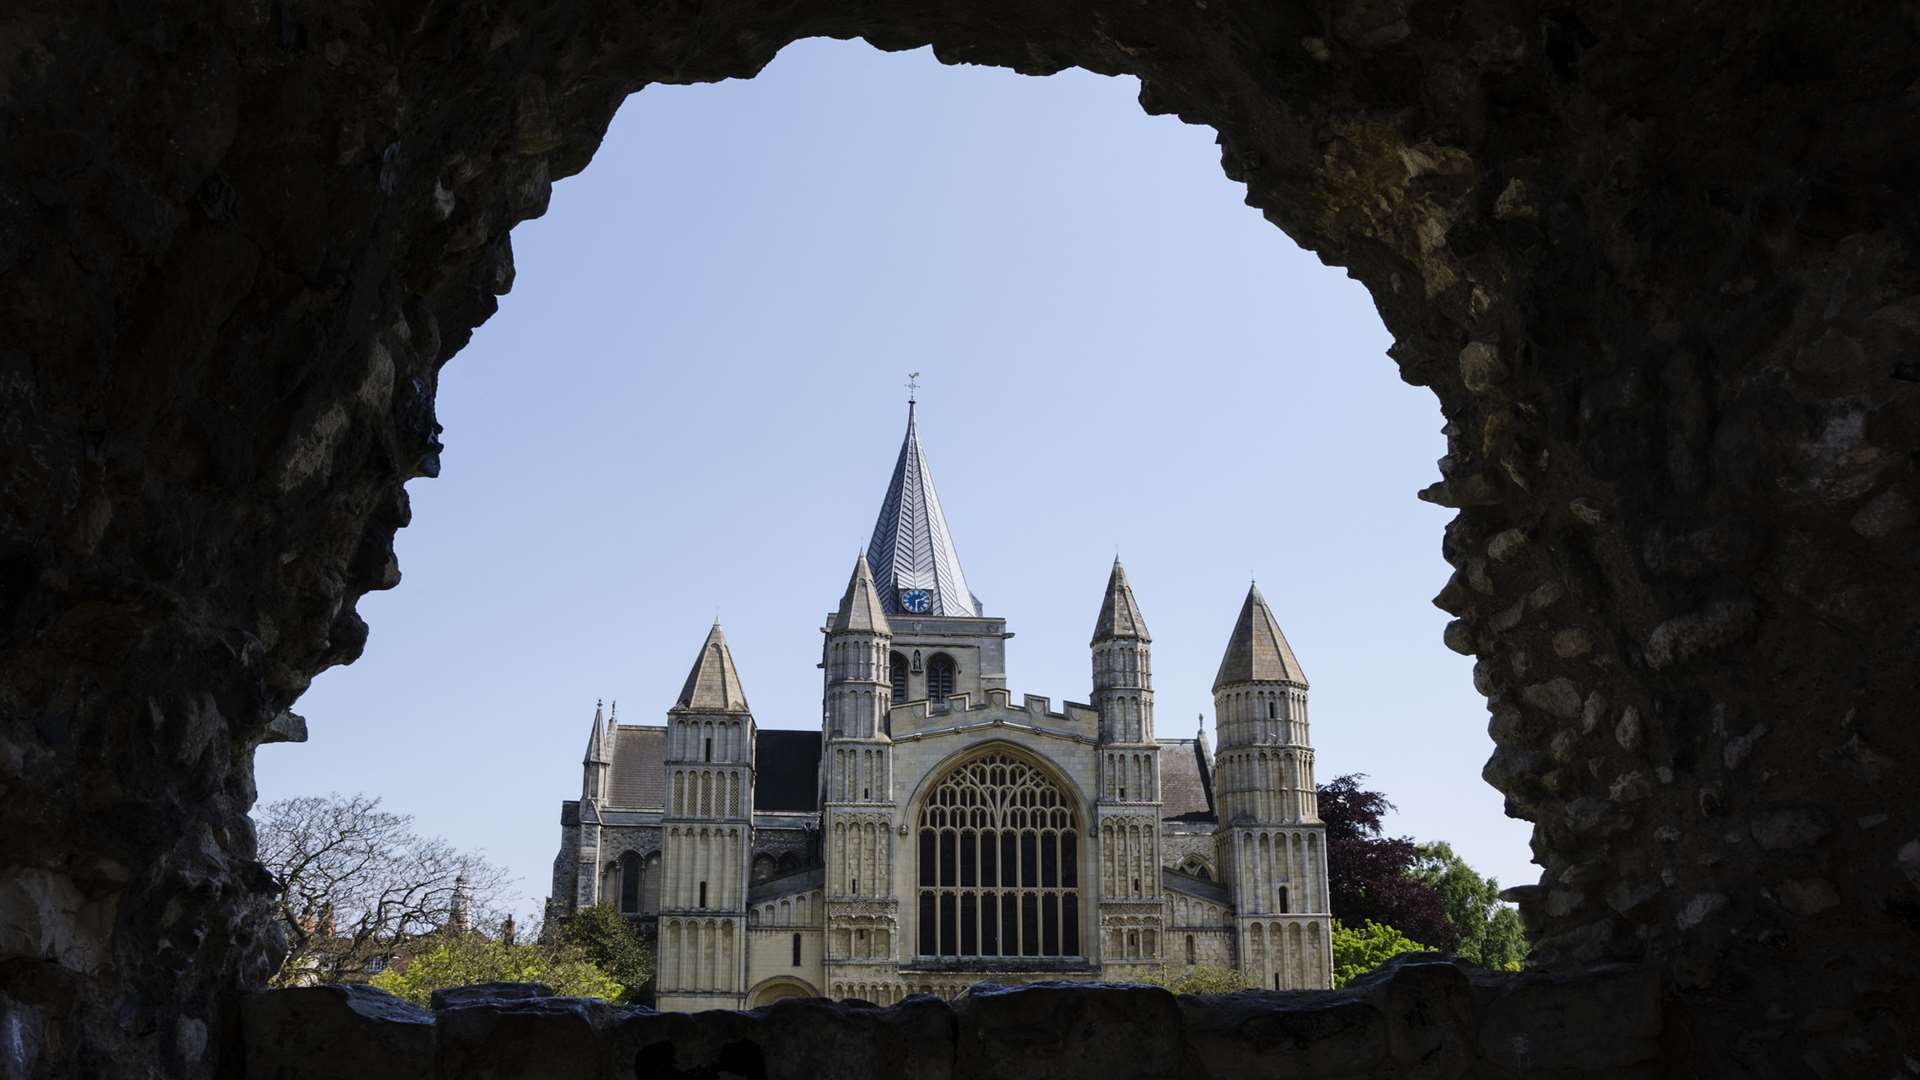 Kent is laced with history, heritage and culture